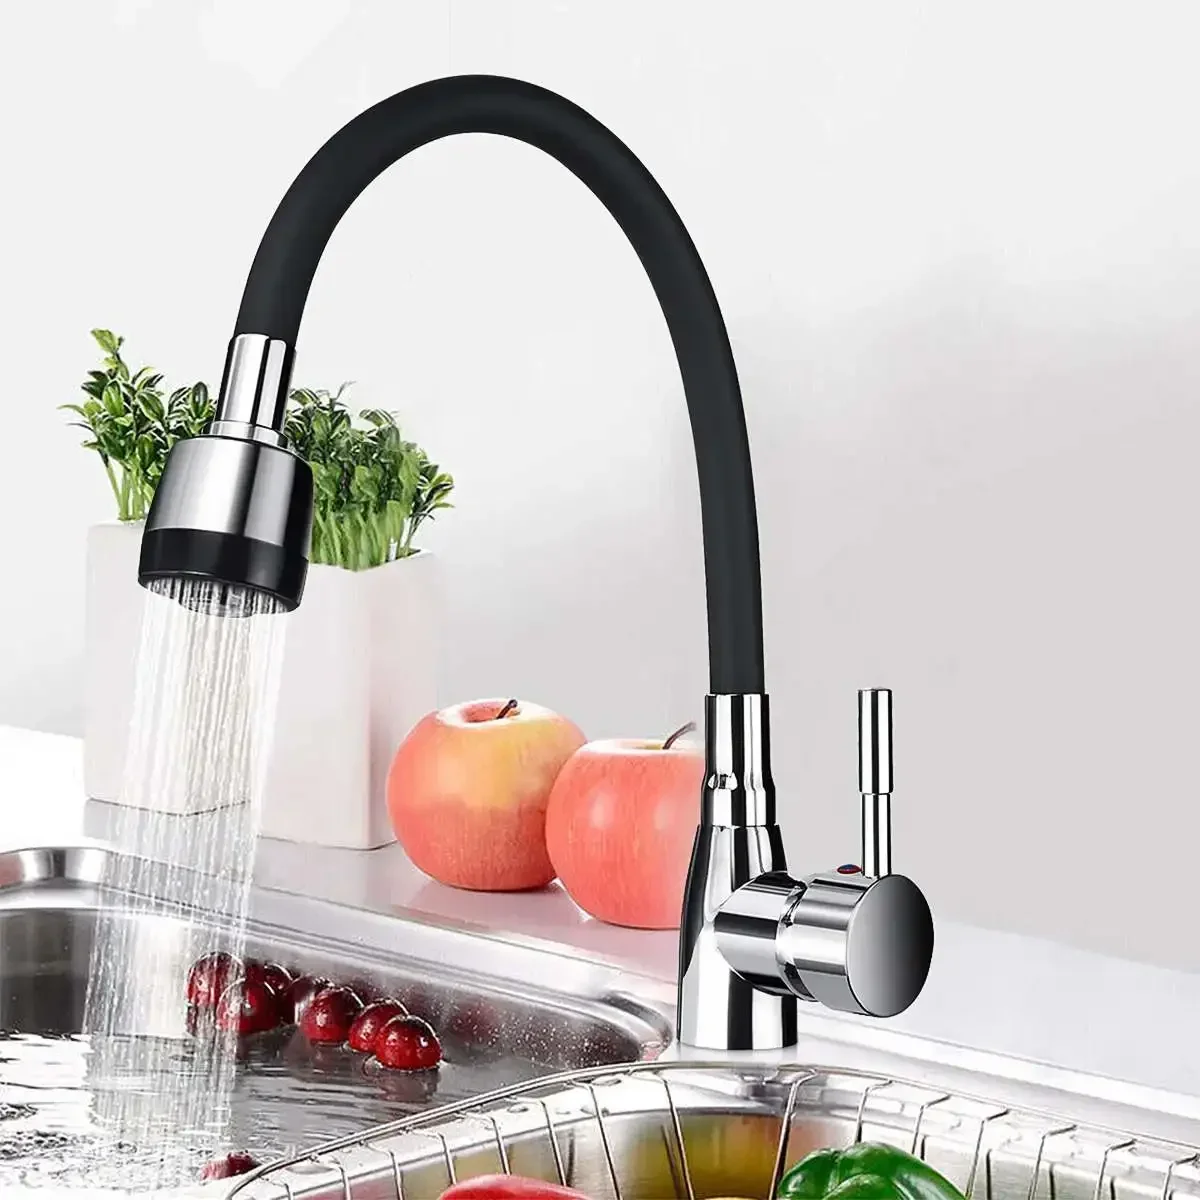 

Black Polished Chrome 360 Rotating Single Handle Kitchen Basin Faucet Deck Mounted Cold and Hot Water Mixer Tap Torneira